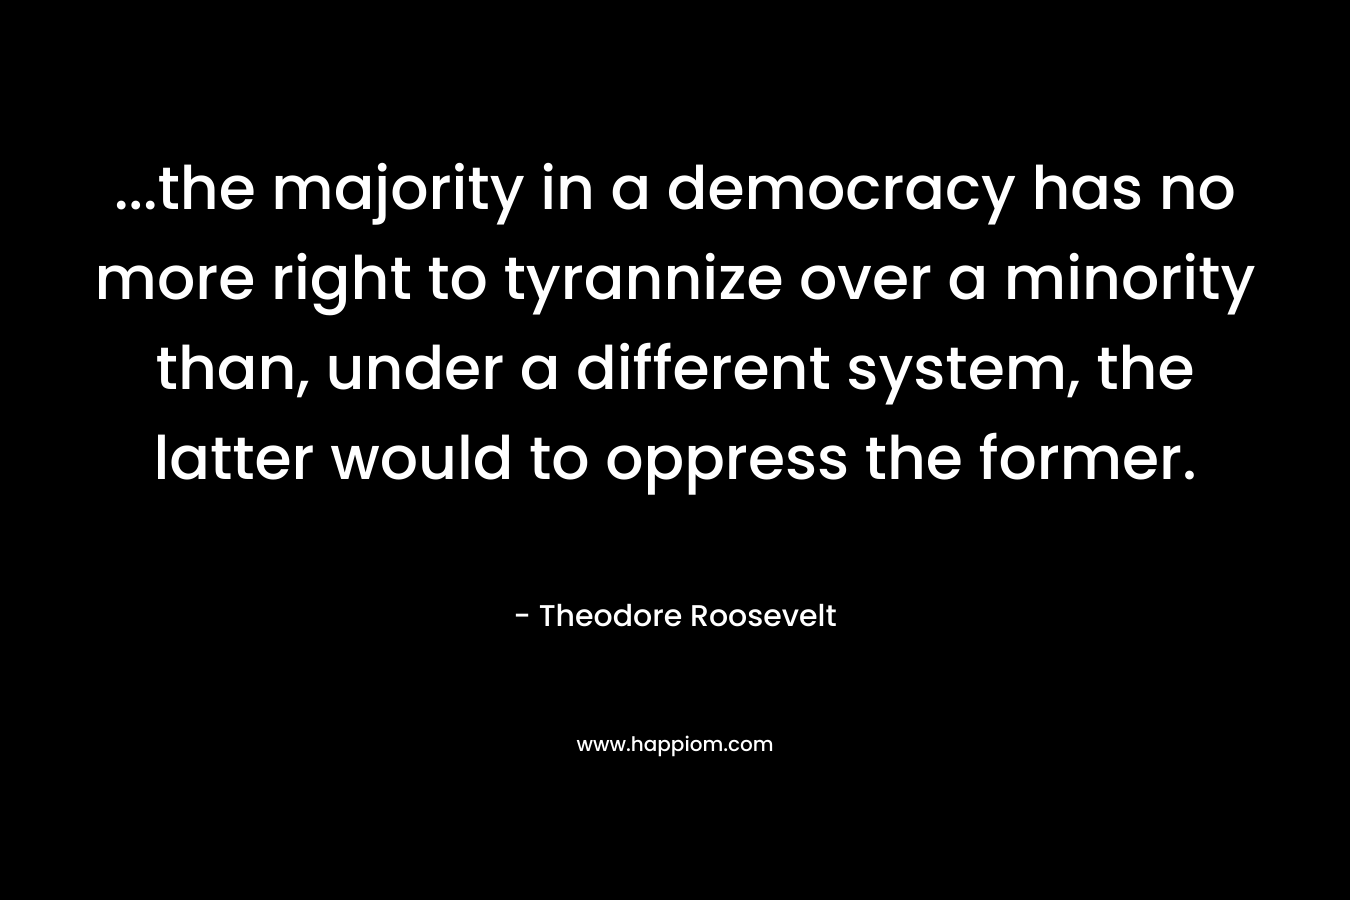 ...the majority in a democracy has no more right to tyrannize over a minority than, under a different system, the latter would to oppress the former.